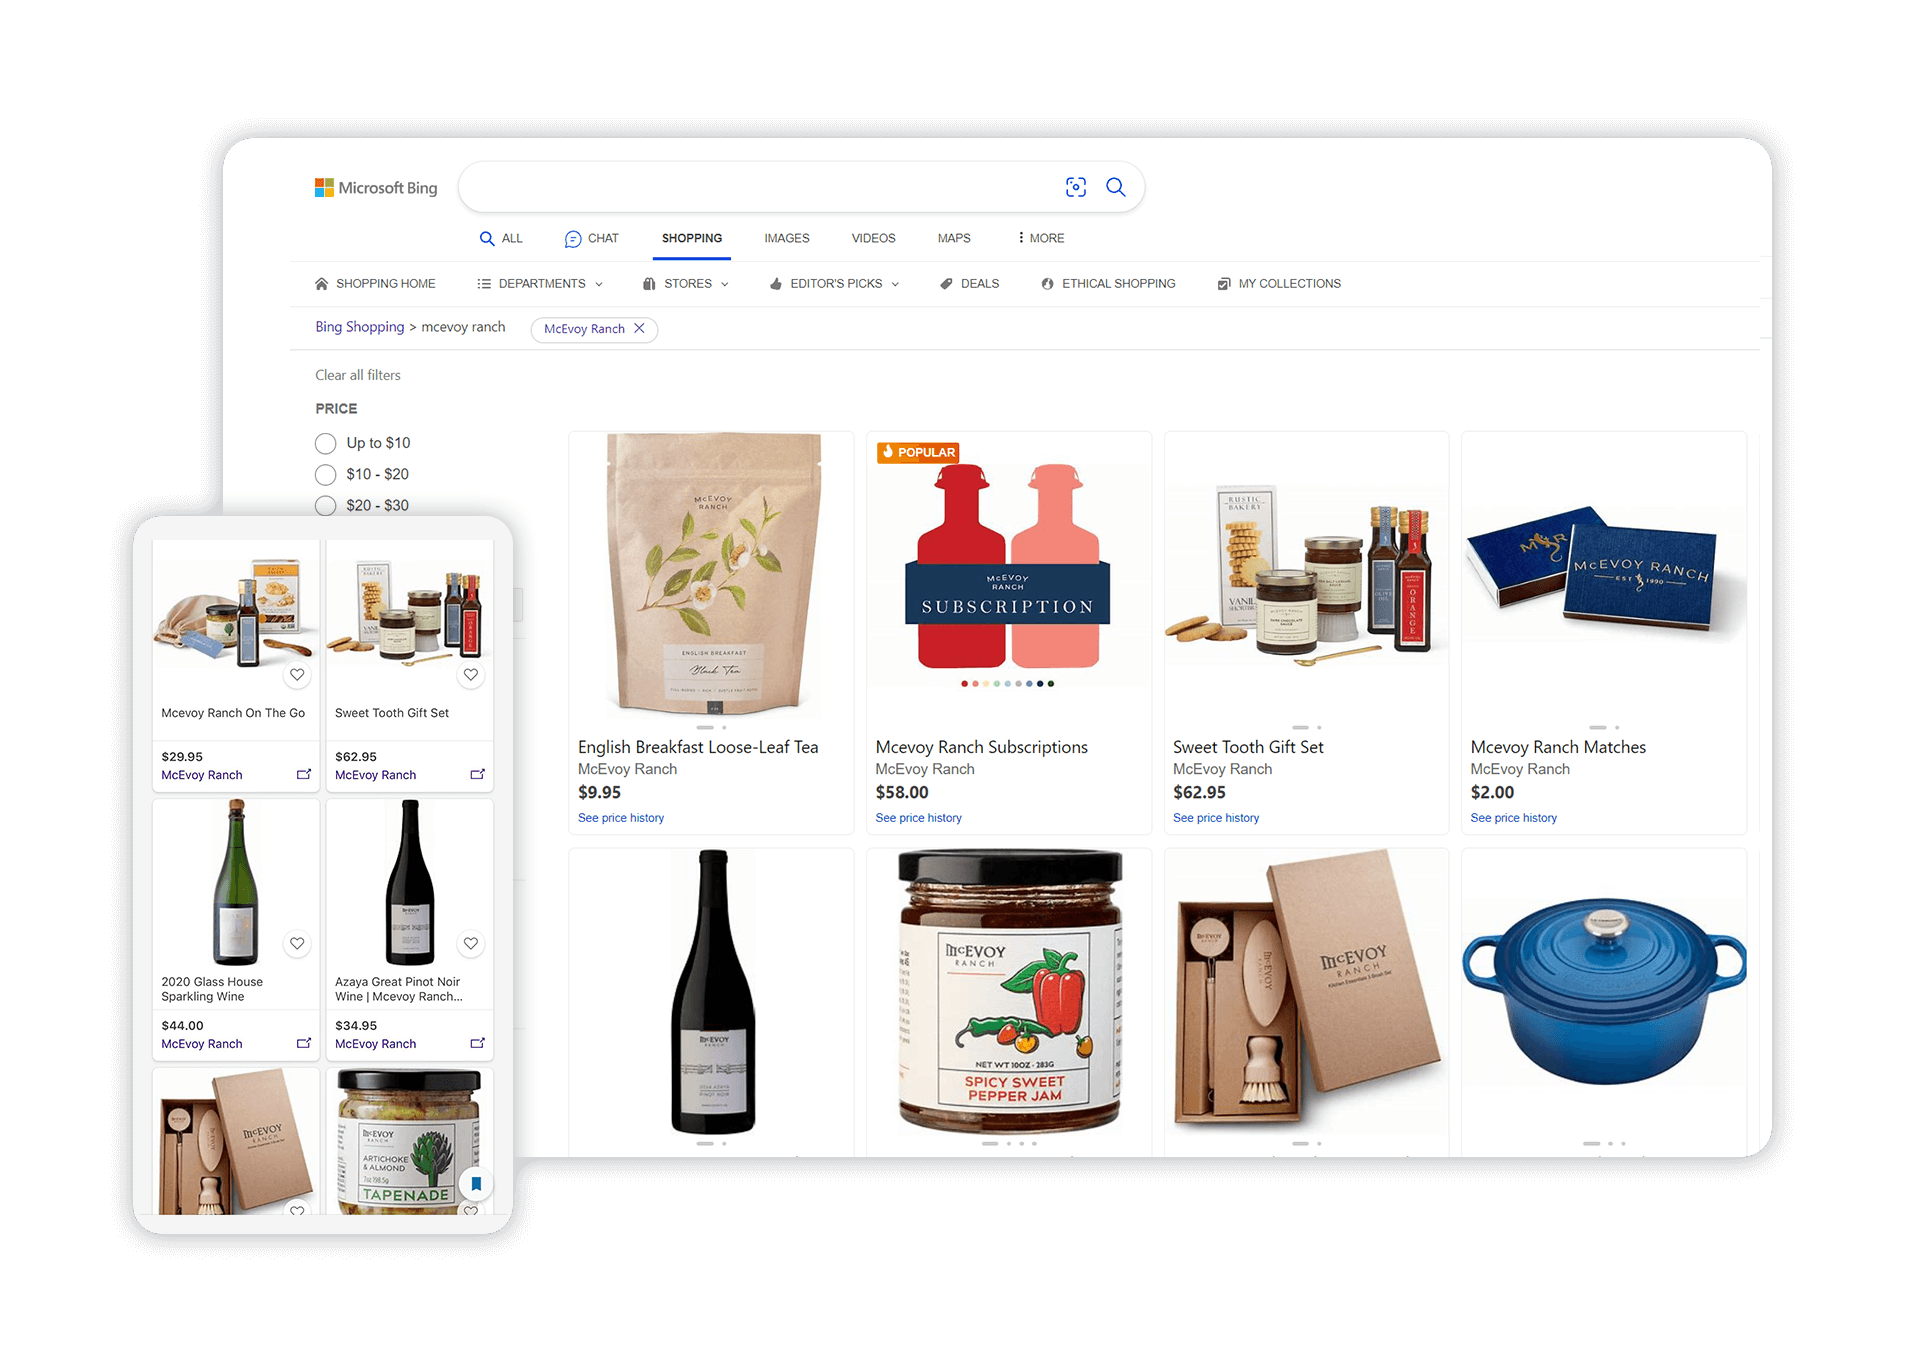 Google and Bing Shopping Ads